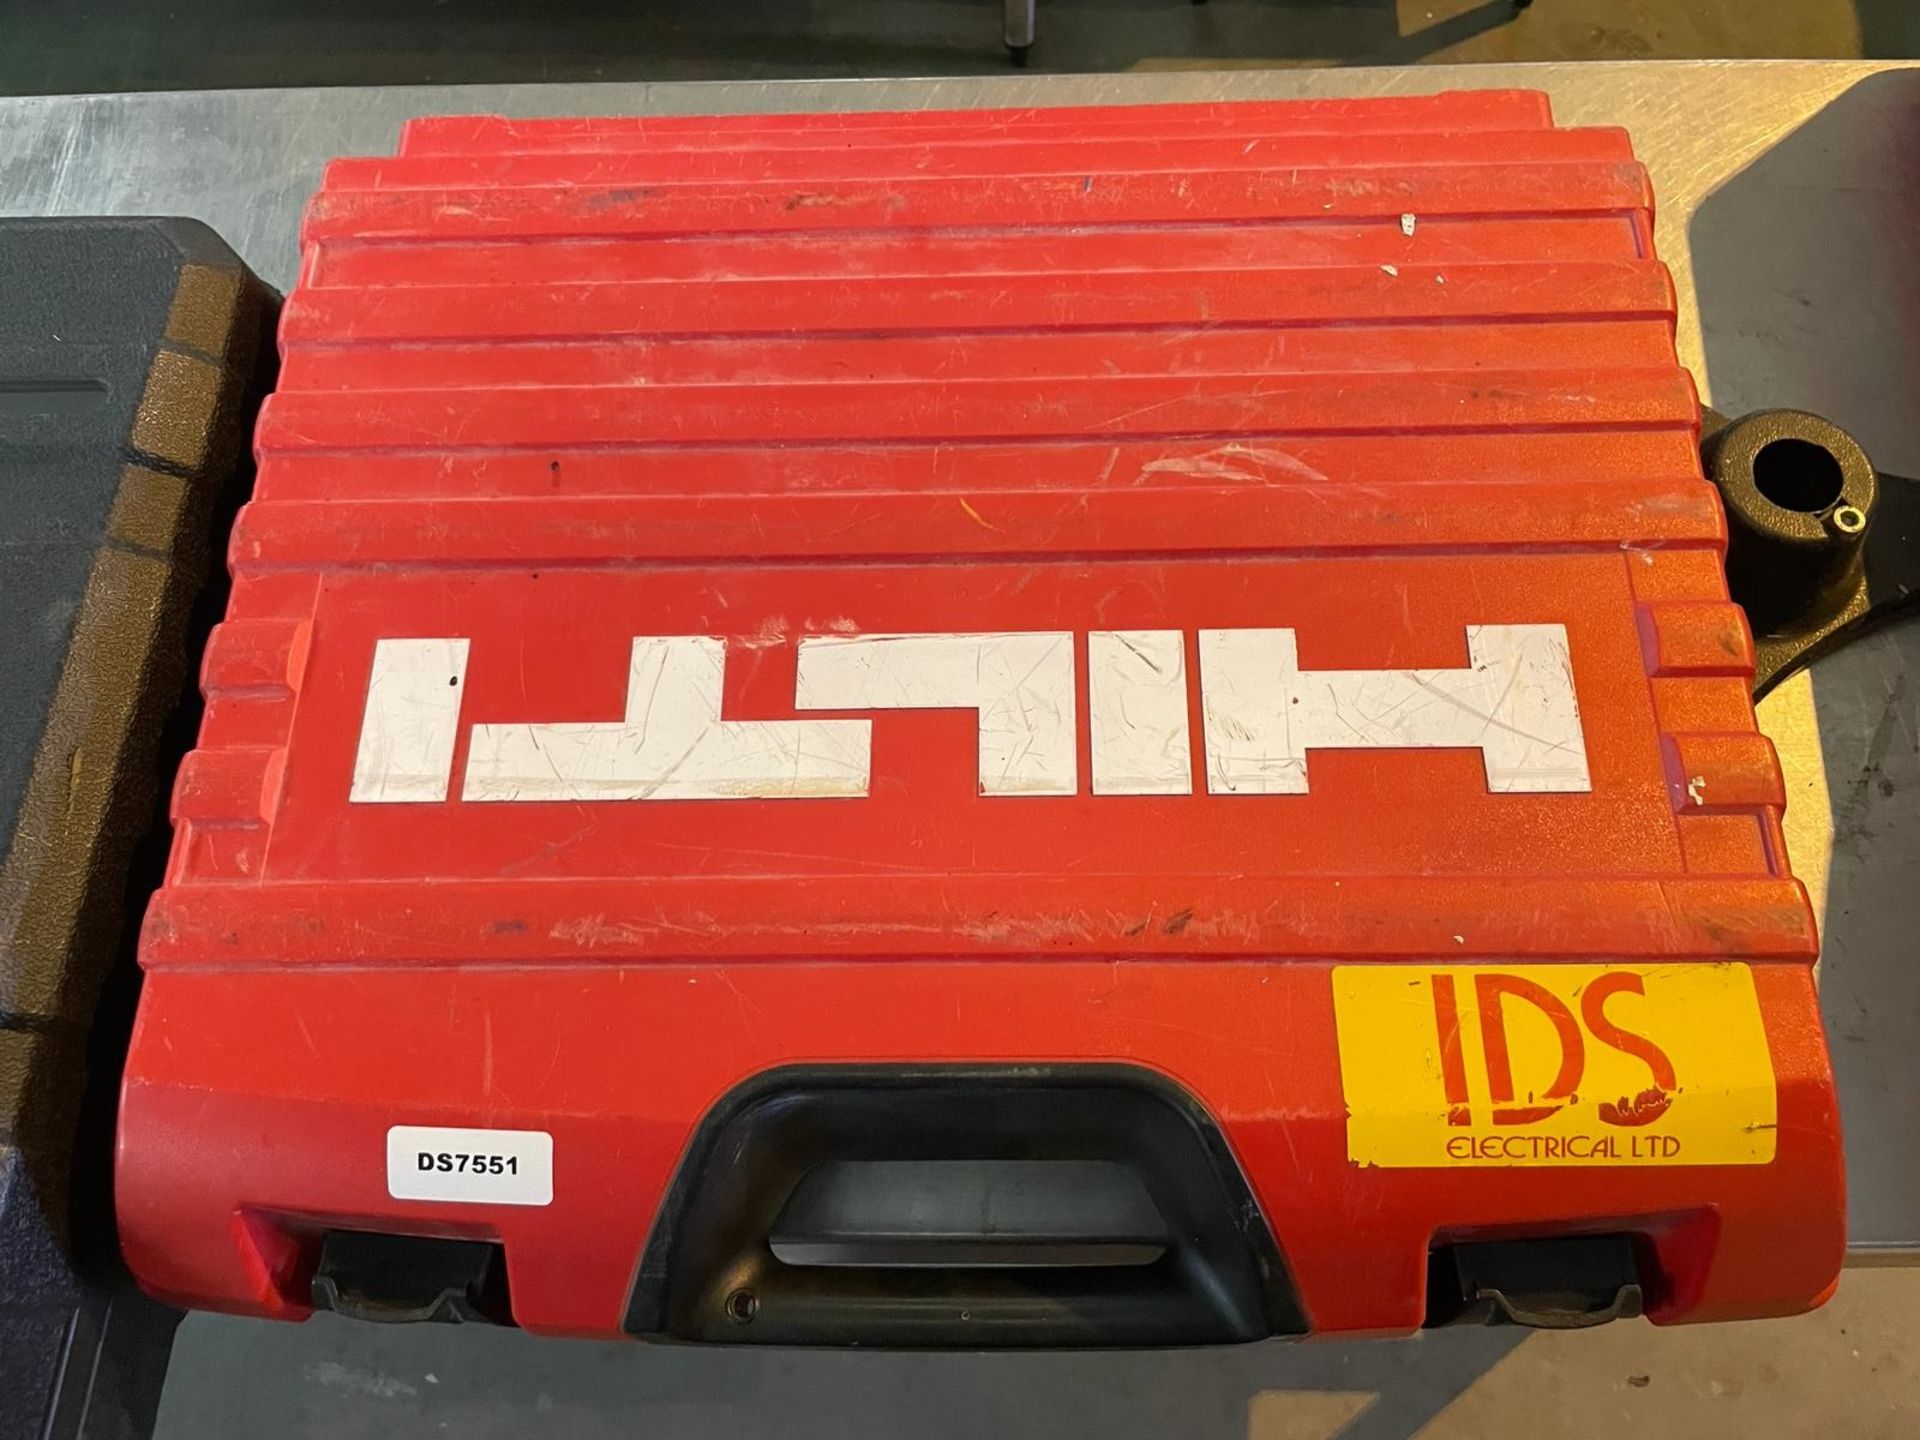 1 x Hilti BX3 Cordless Nail Gun Fastening Tool - Includes Case, Battery and Charger - RRP £3,400 - Image 7 of 7